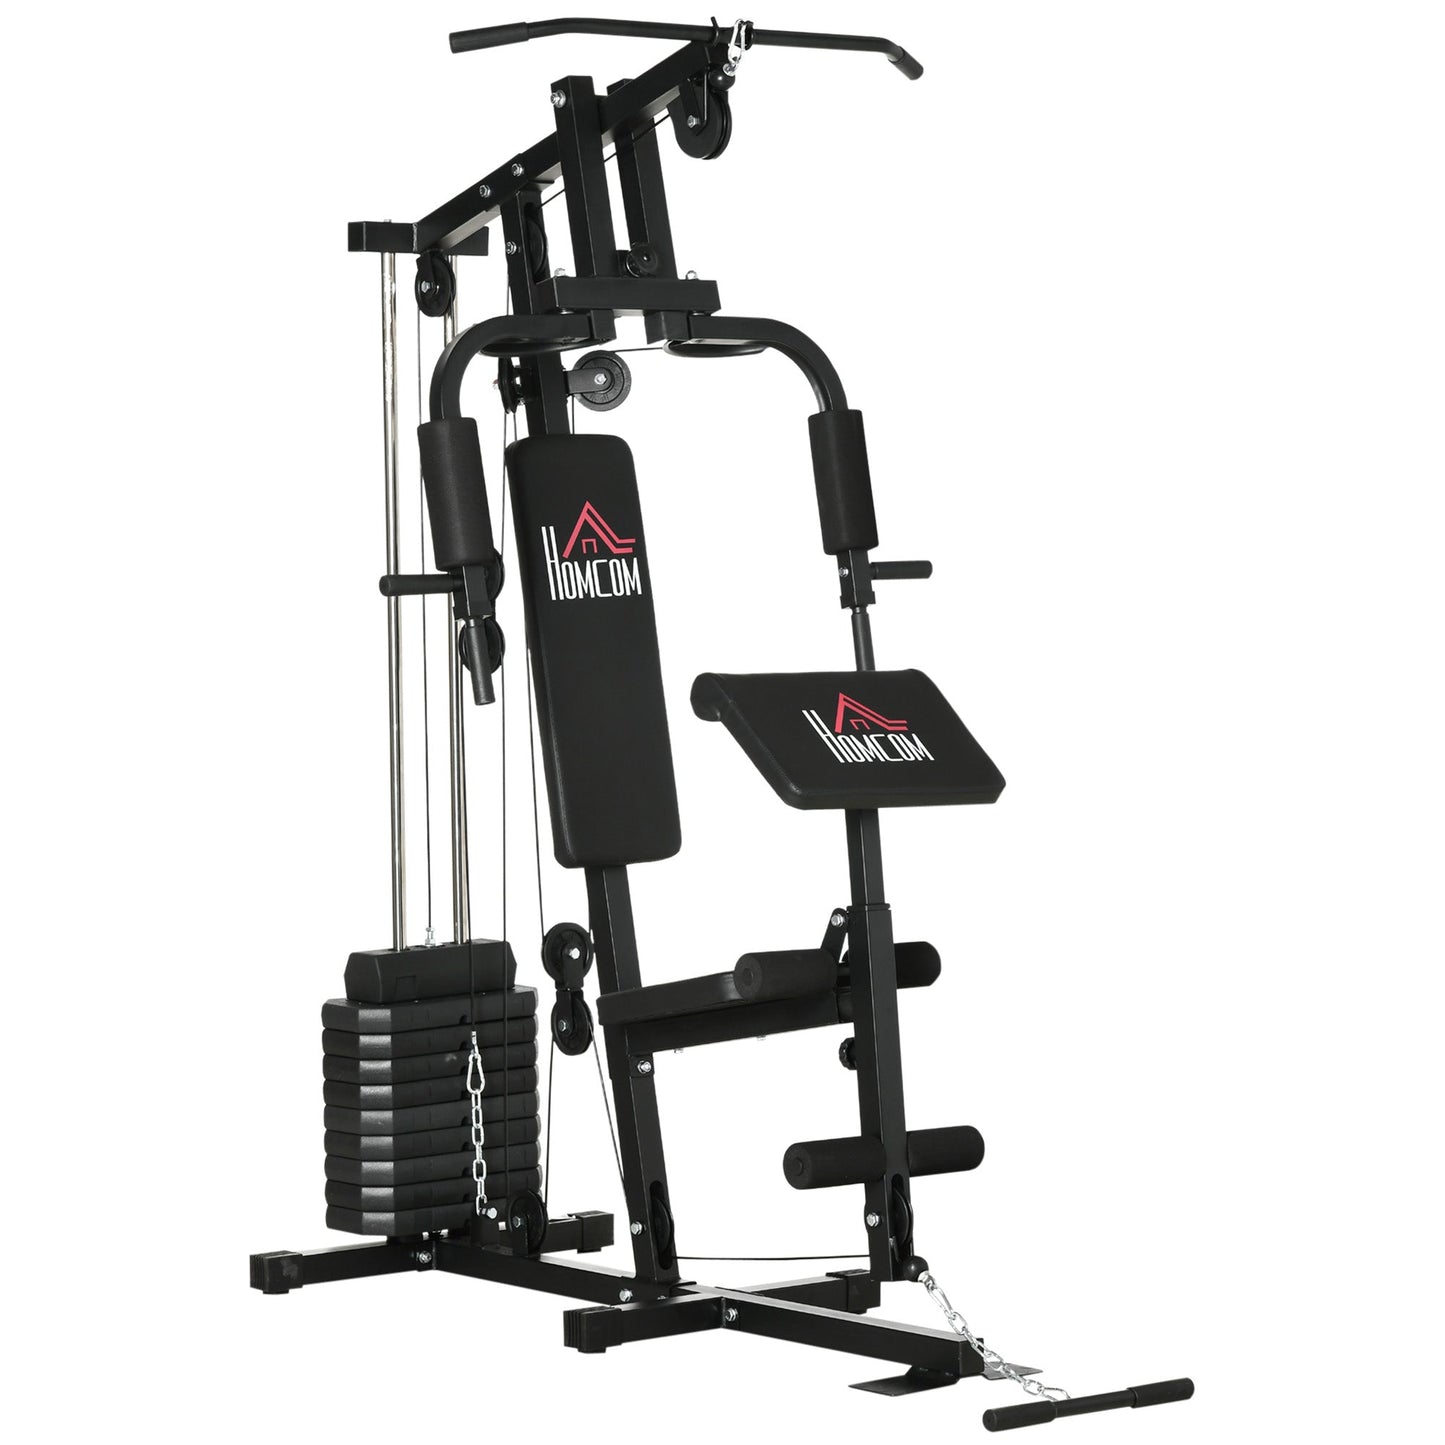 Multifunctional Fitness Station with weights up to 45kg and padded bench, 135x103x210cm